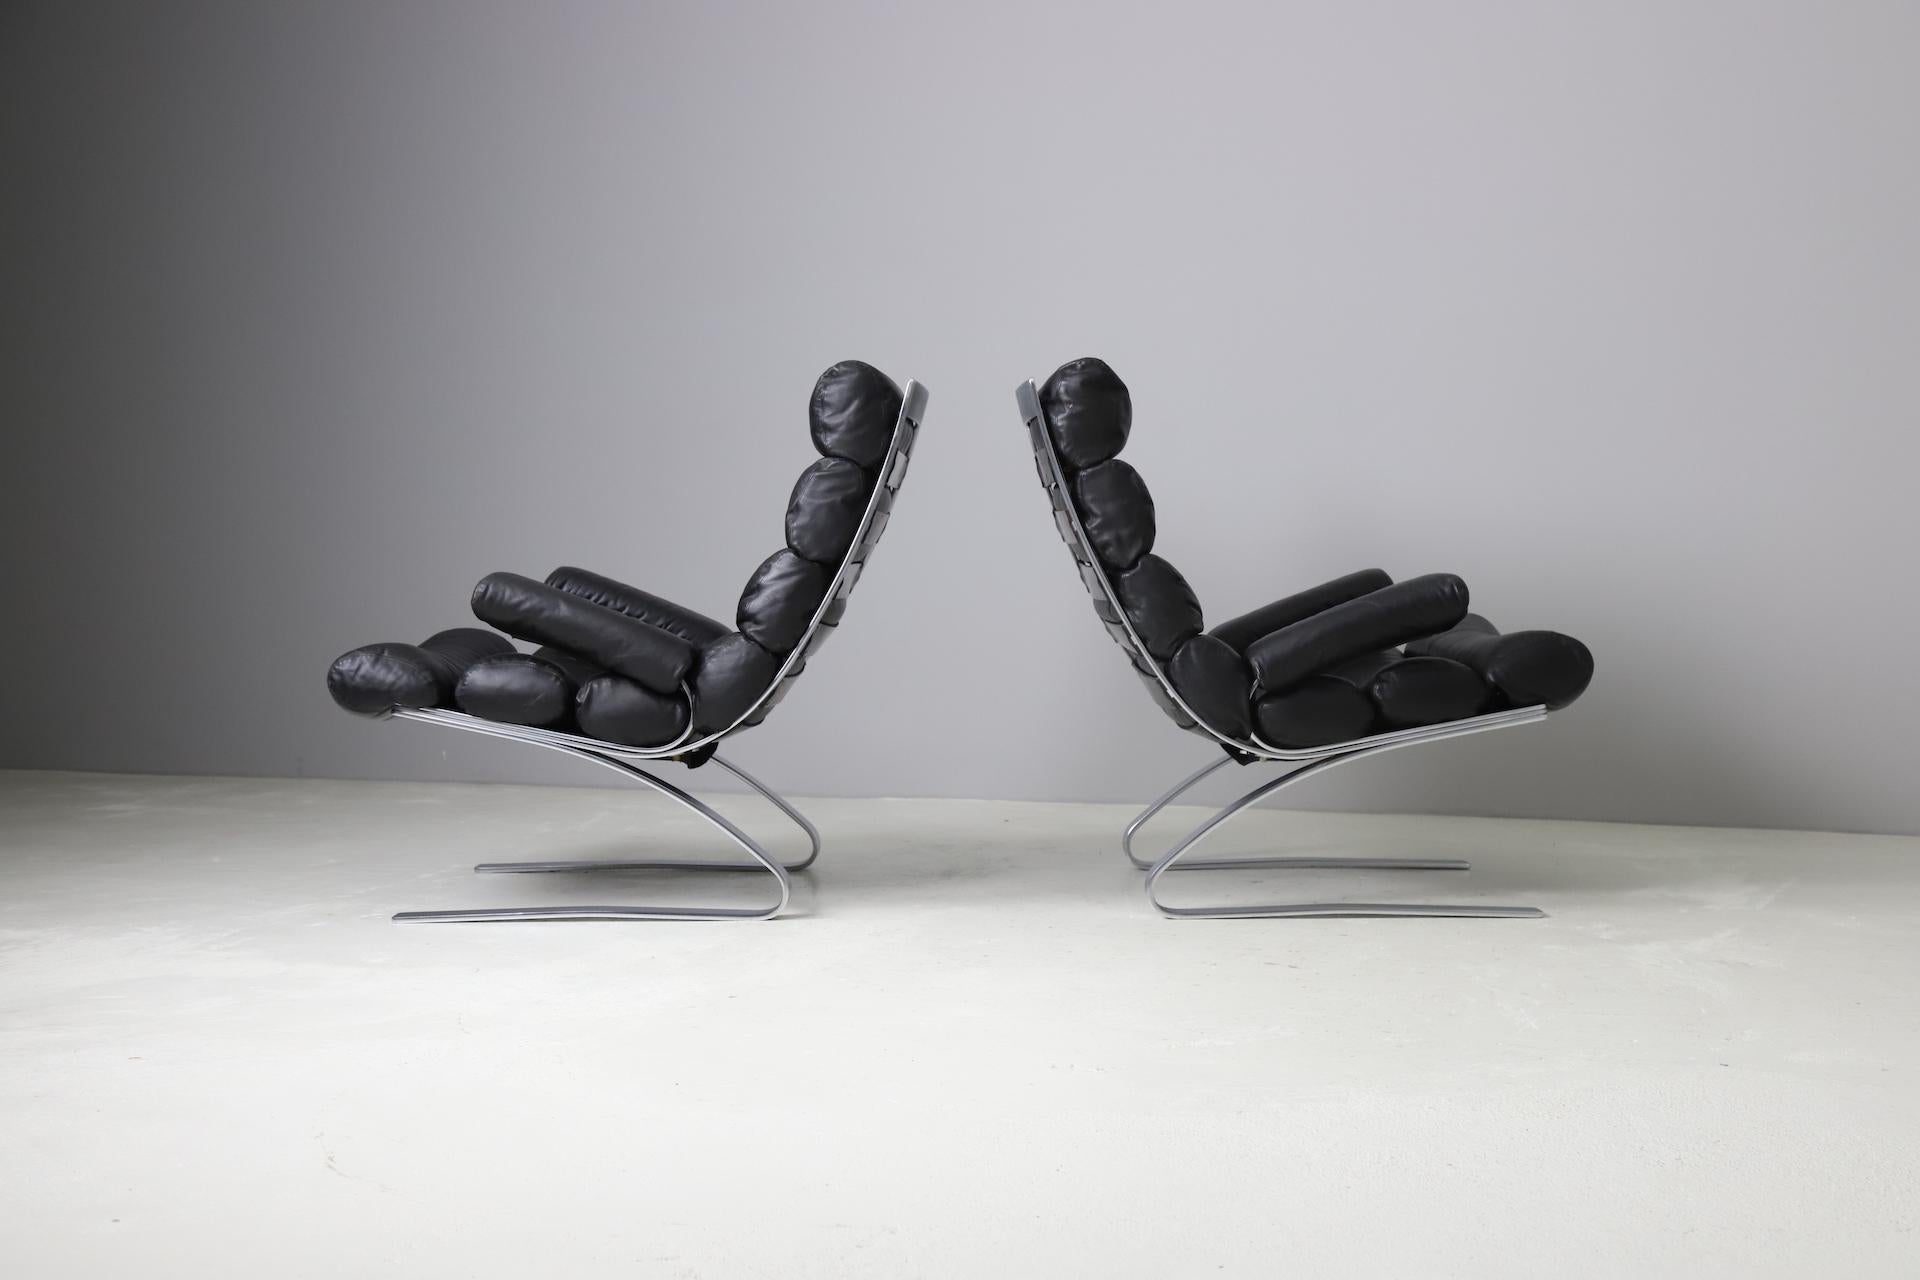 Early pair of 'Sinus' lounge chairs designed by Reinhold Adolf & Hans Jürgen Schröpfer for COR, Germany 1976. These super comfortable chairs feature a thick steel frame that slightly swings for extra comfort. The original leather seat cushions is